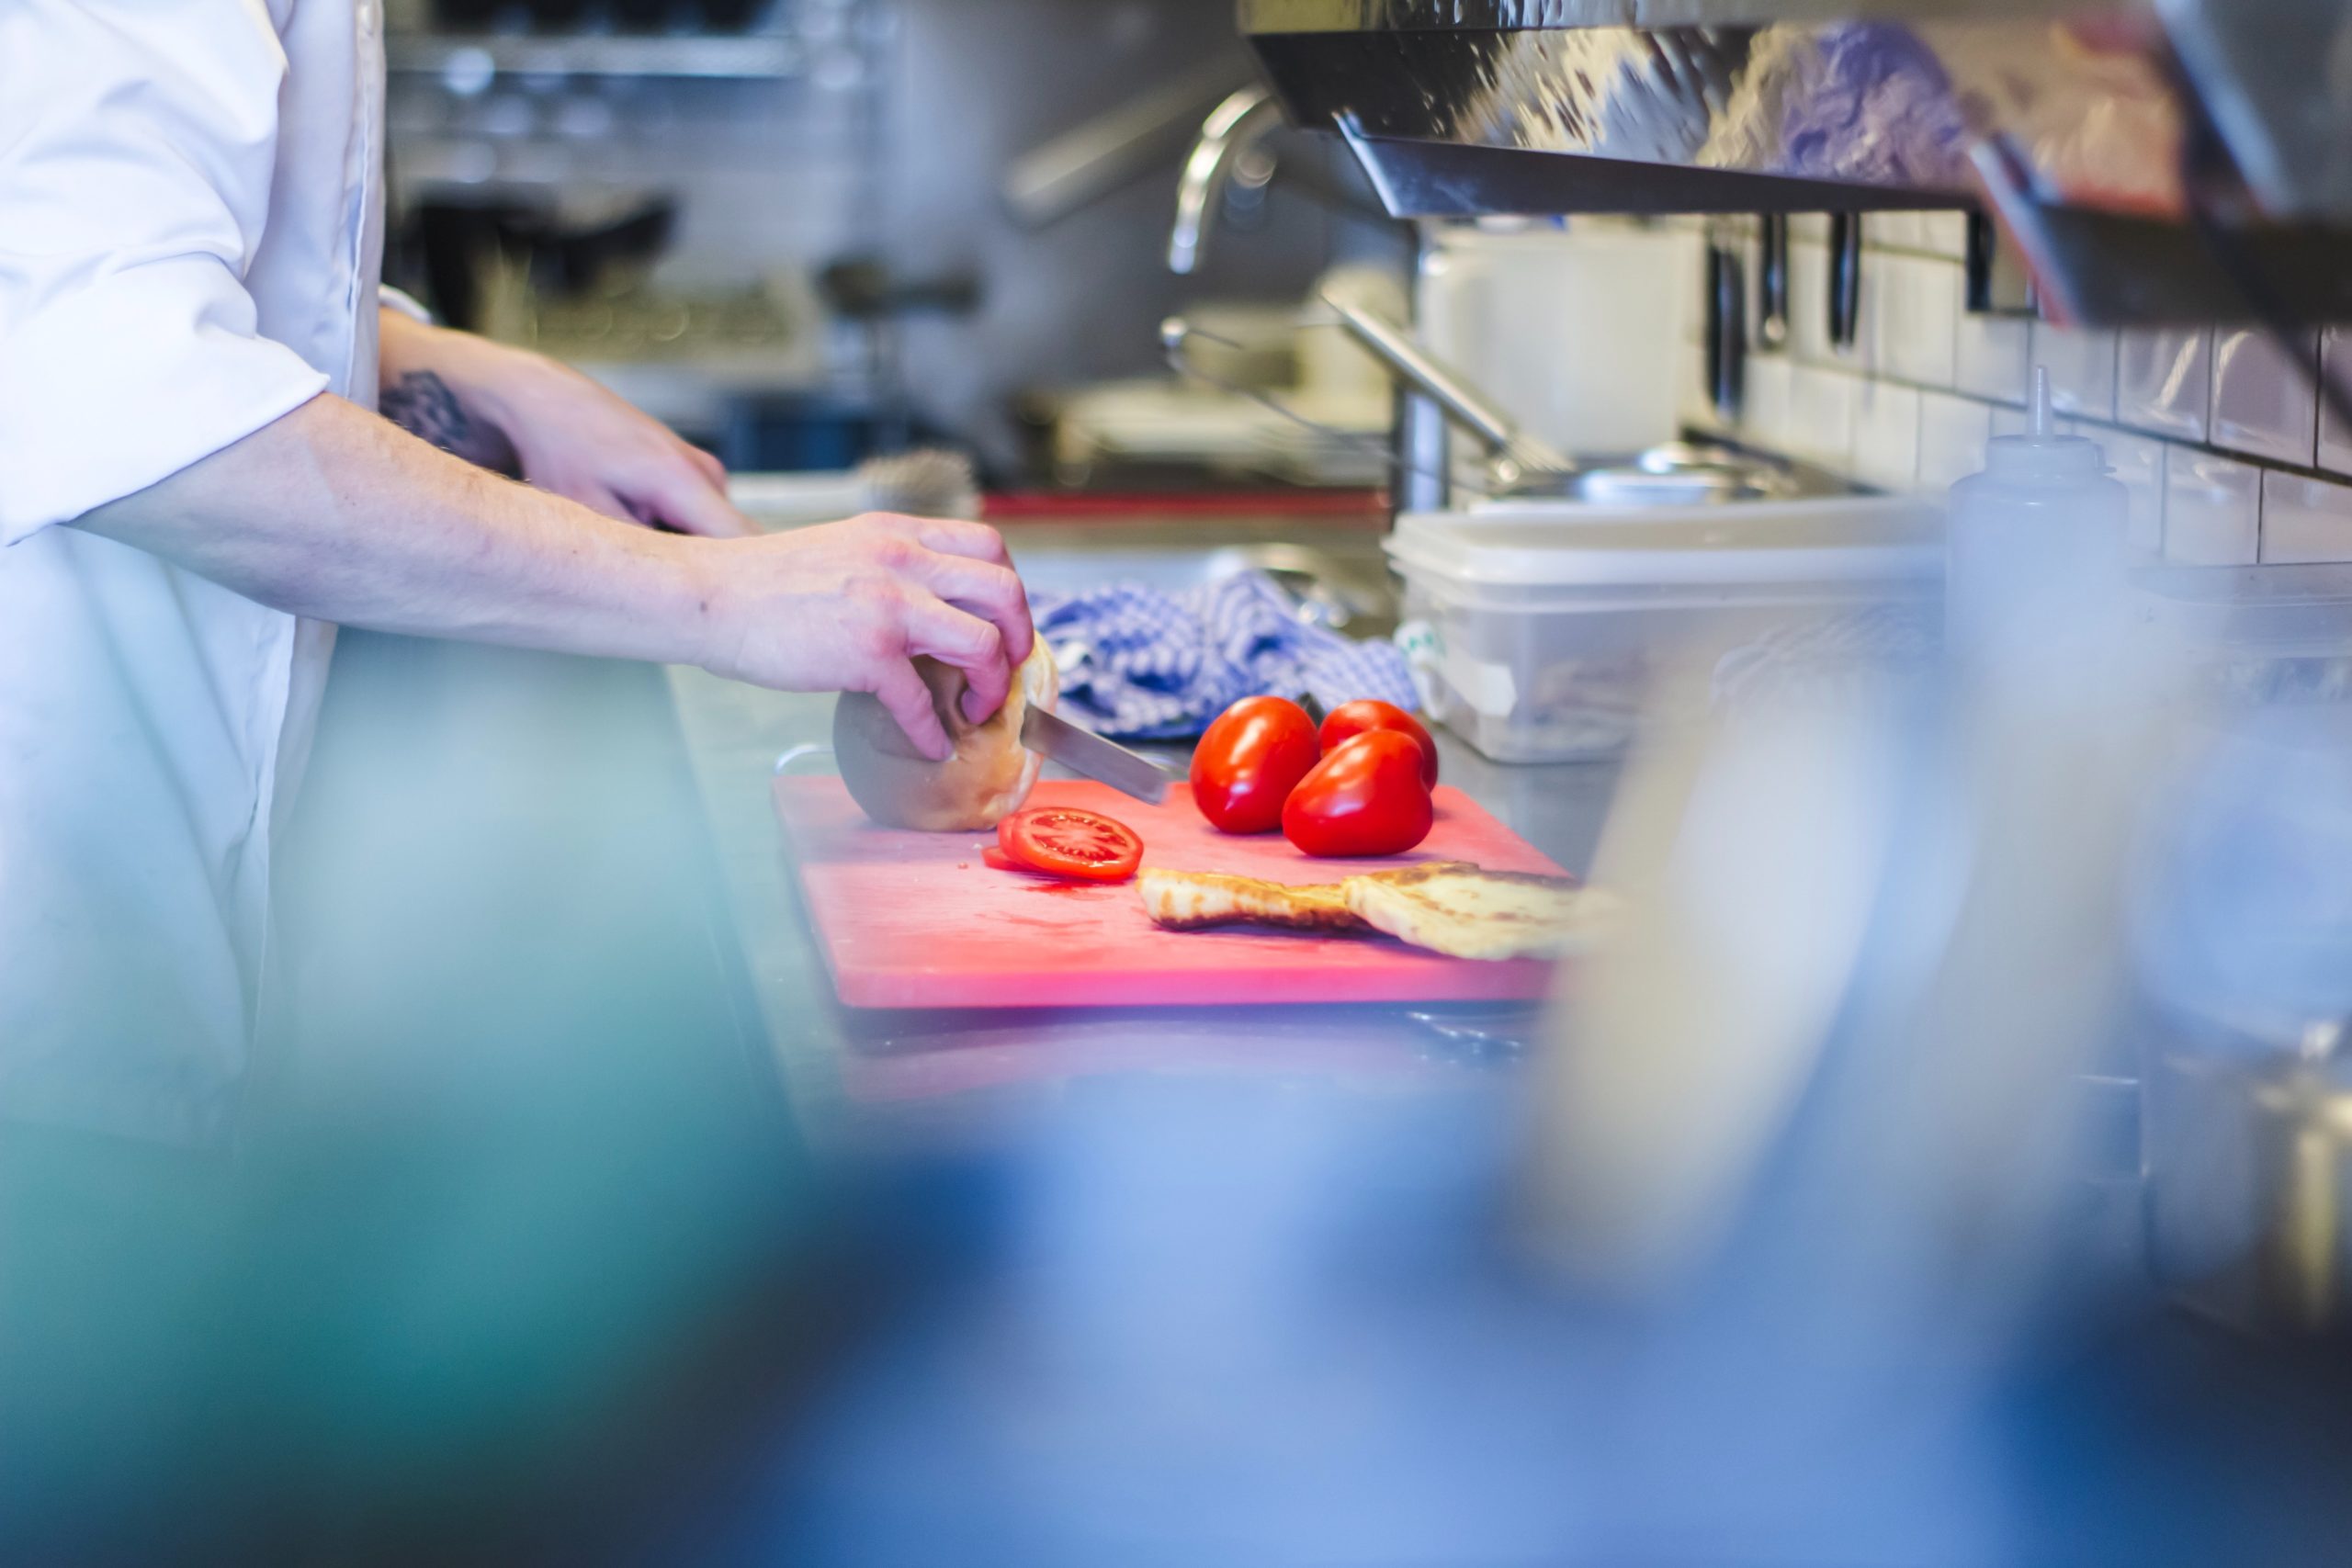 Chef wearing shoe covers in a restaurant kitchen slicing bread with a knife on a cutting board with tomatoes.